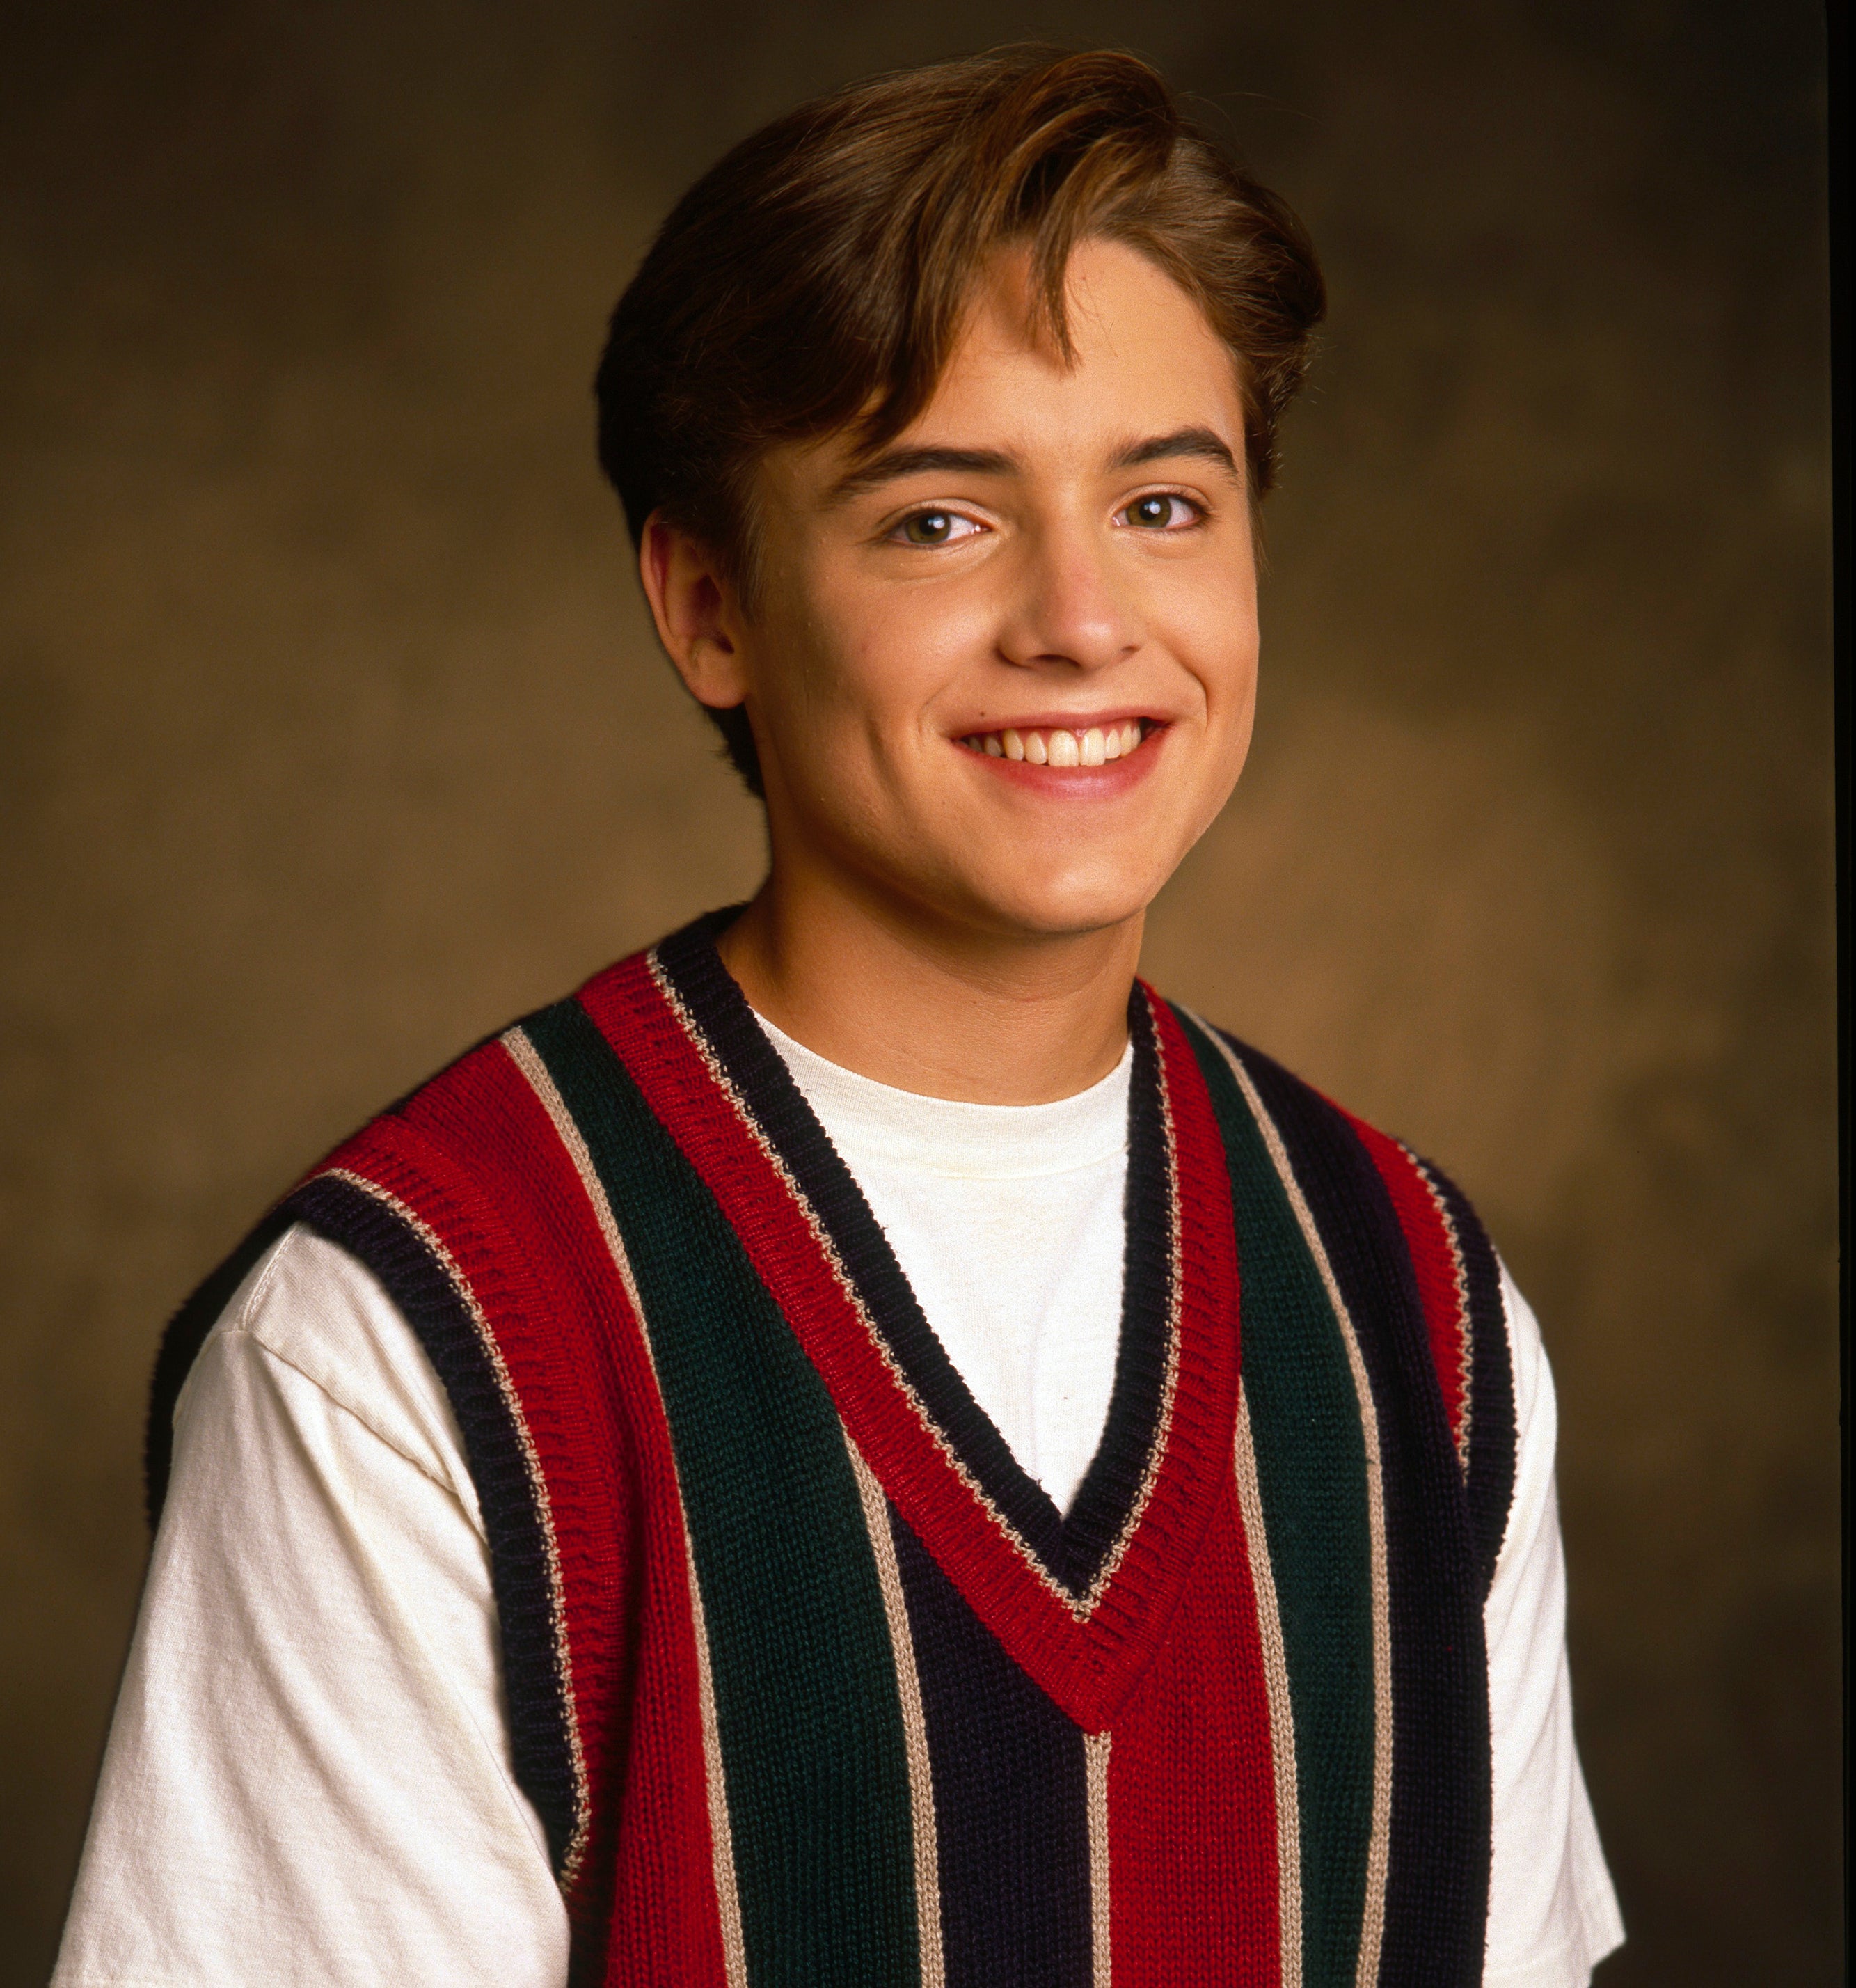 Will Friedle age 17